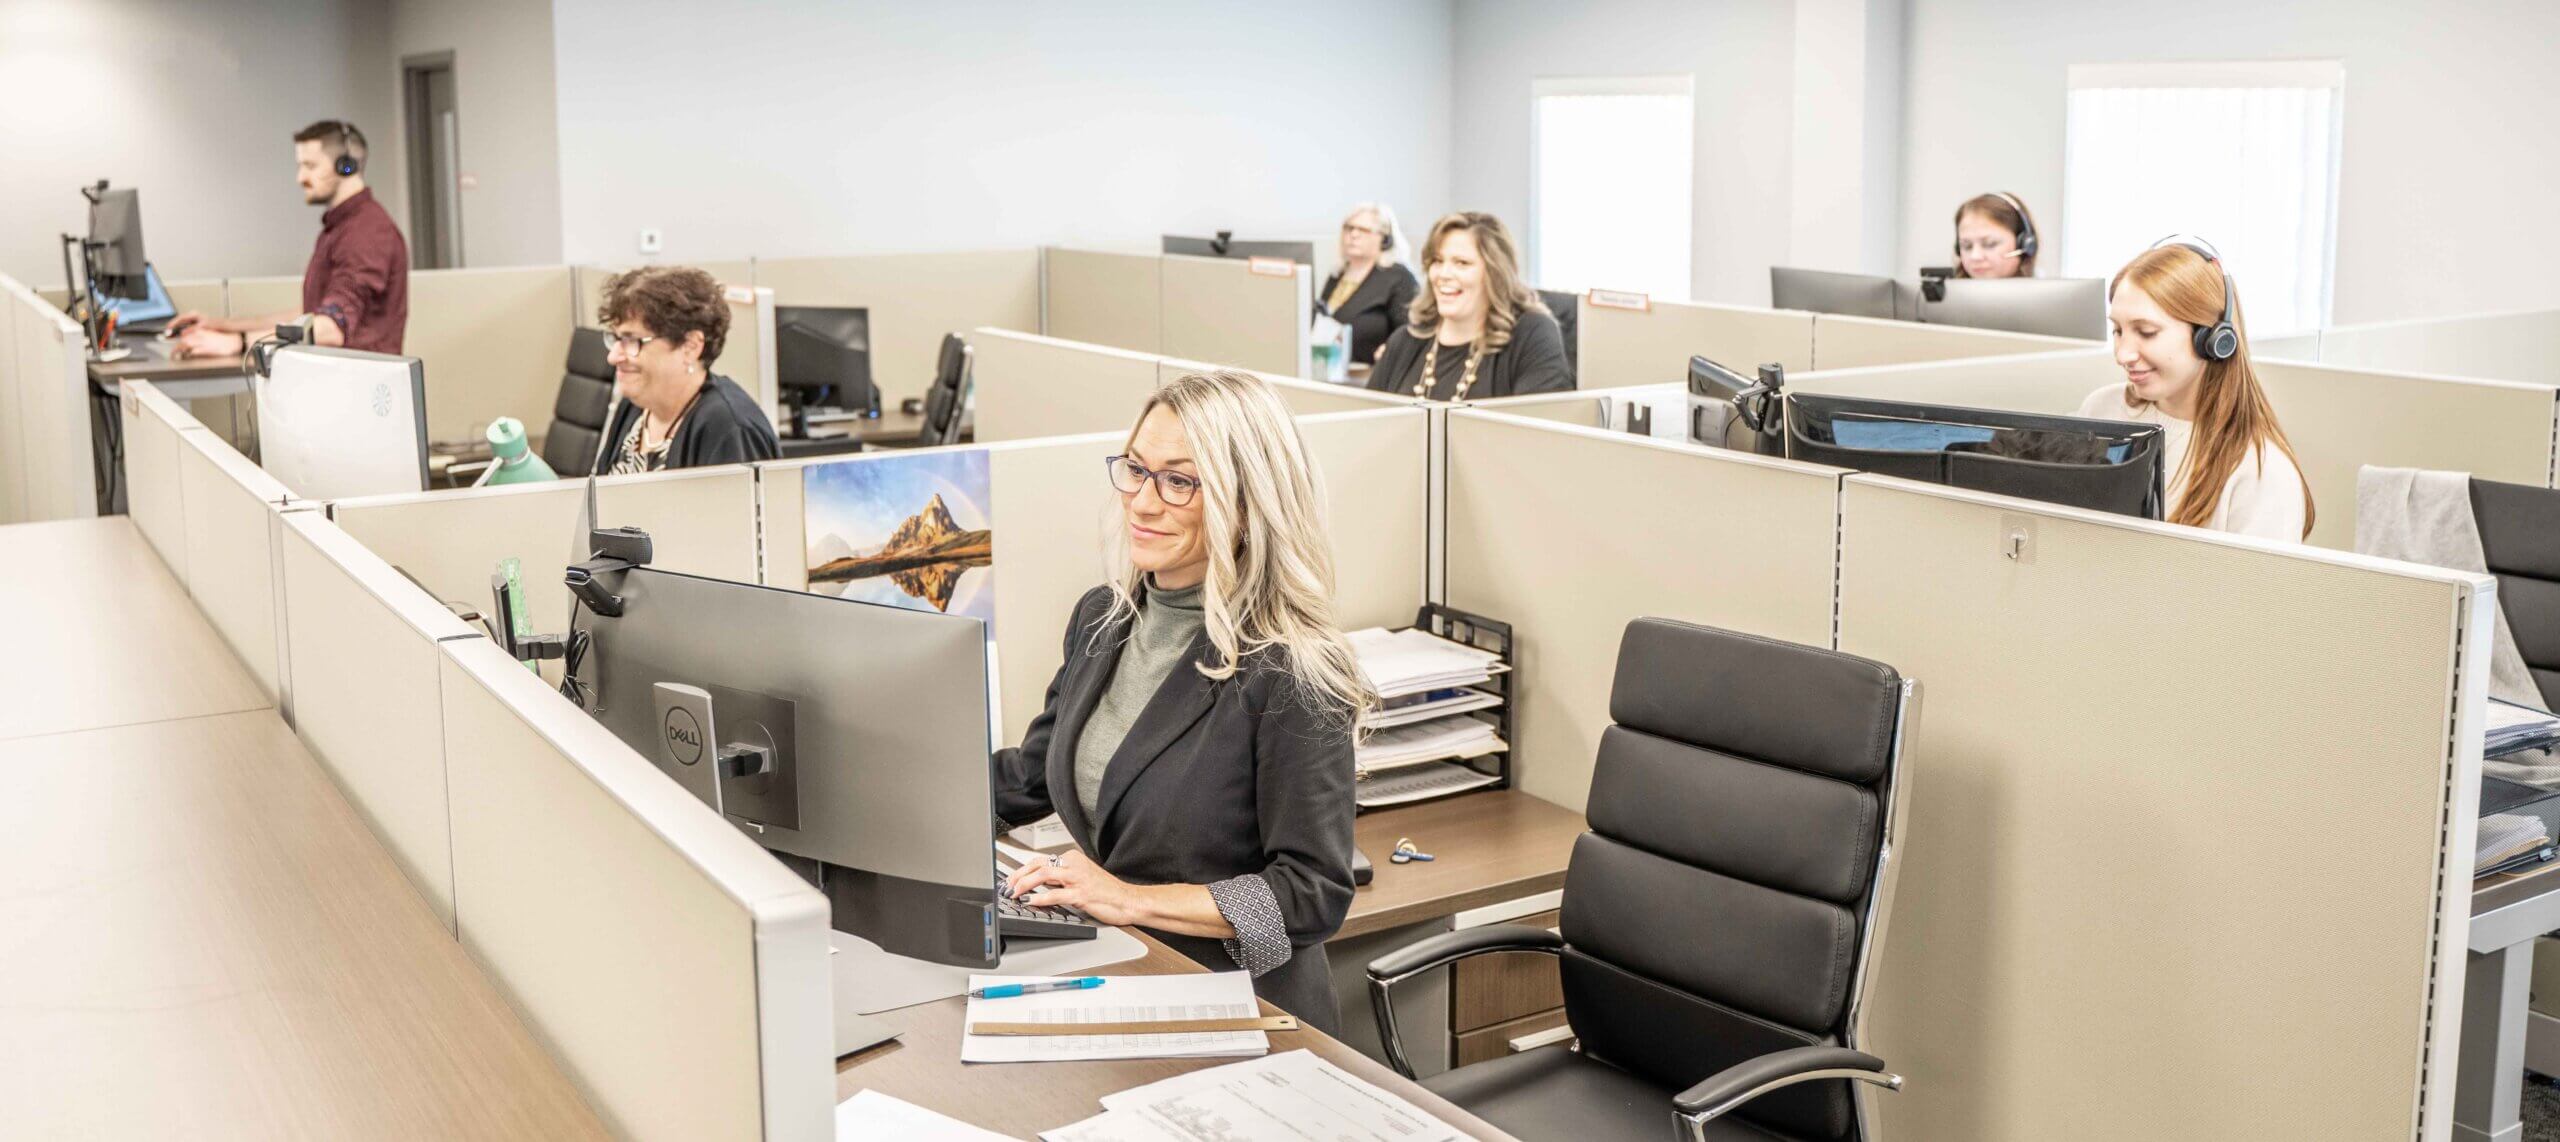 Encore employees sit inside their individual cubicles and work on Payroll Funding for Staffing Companies.